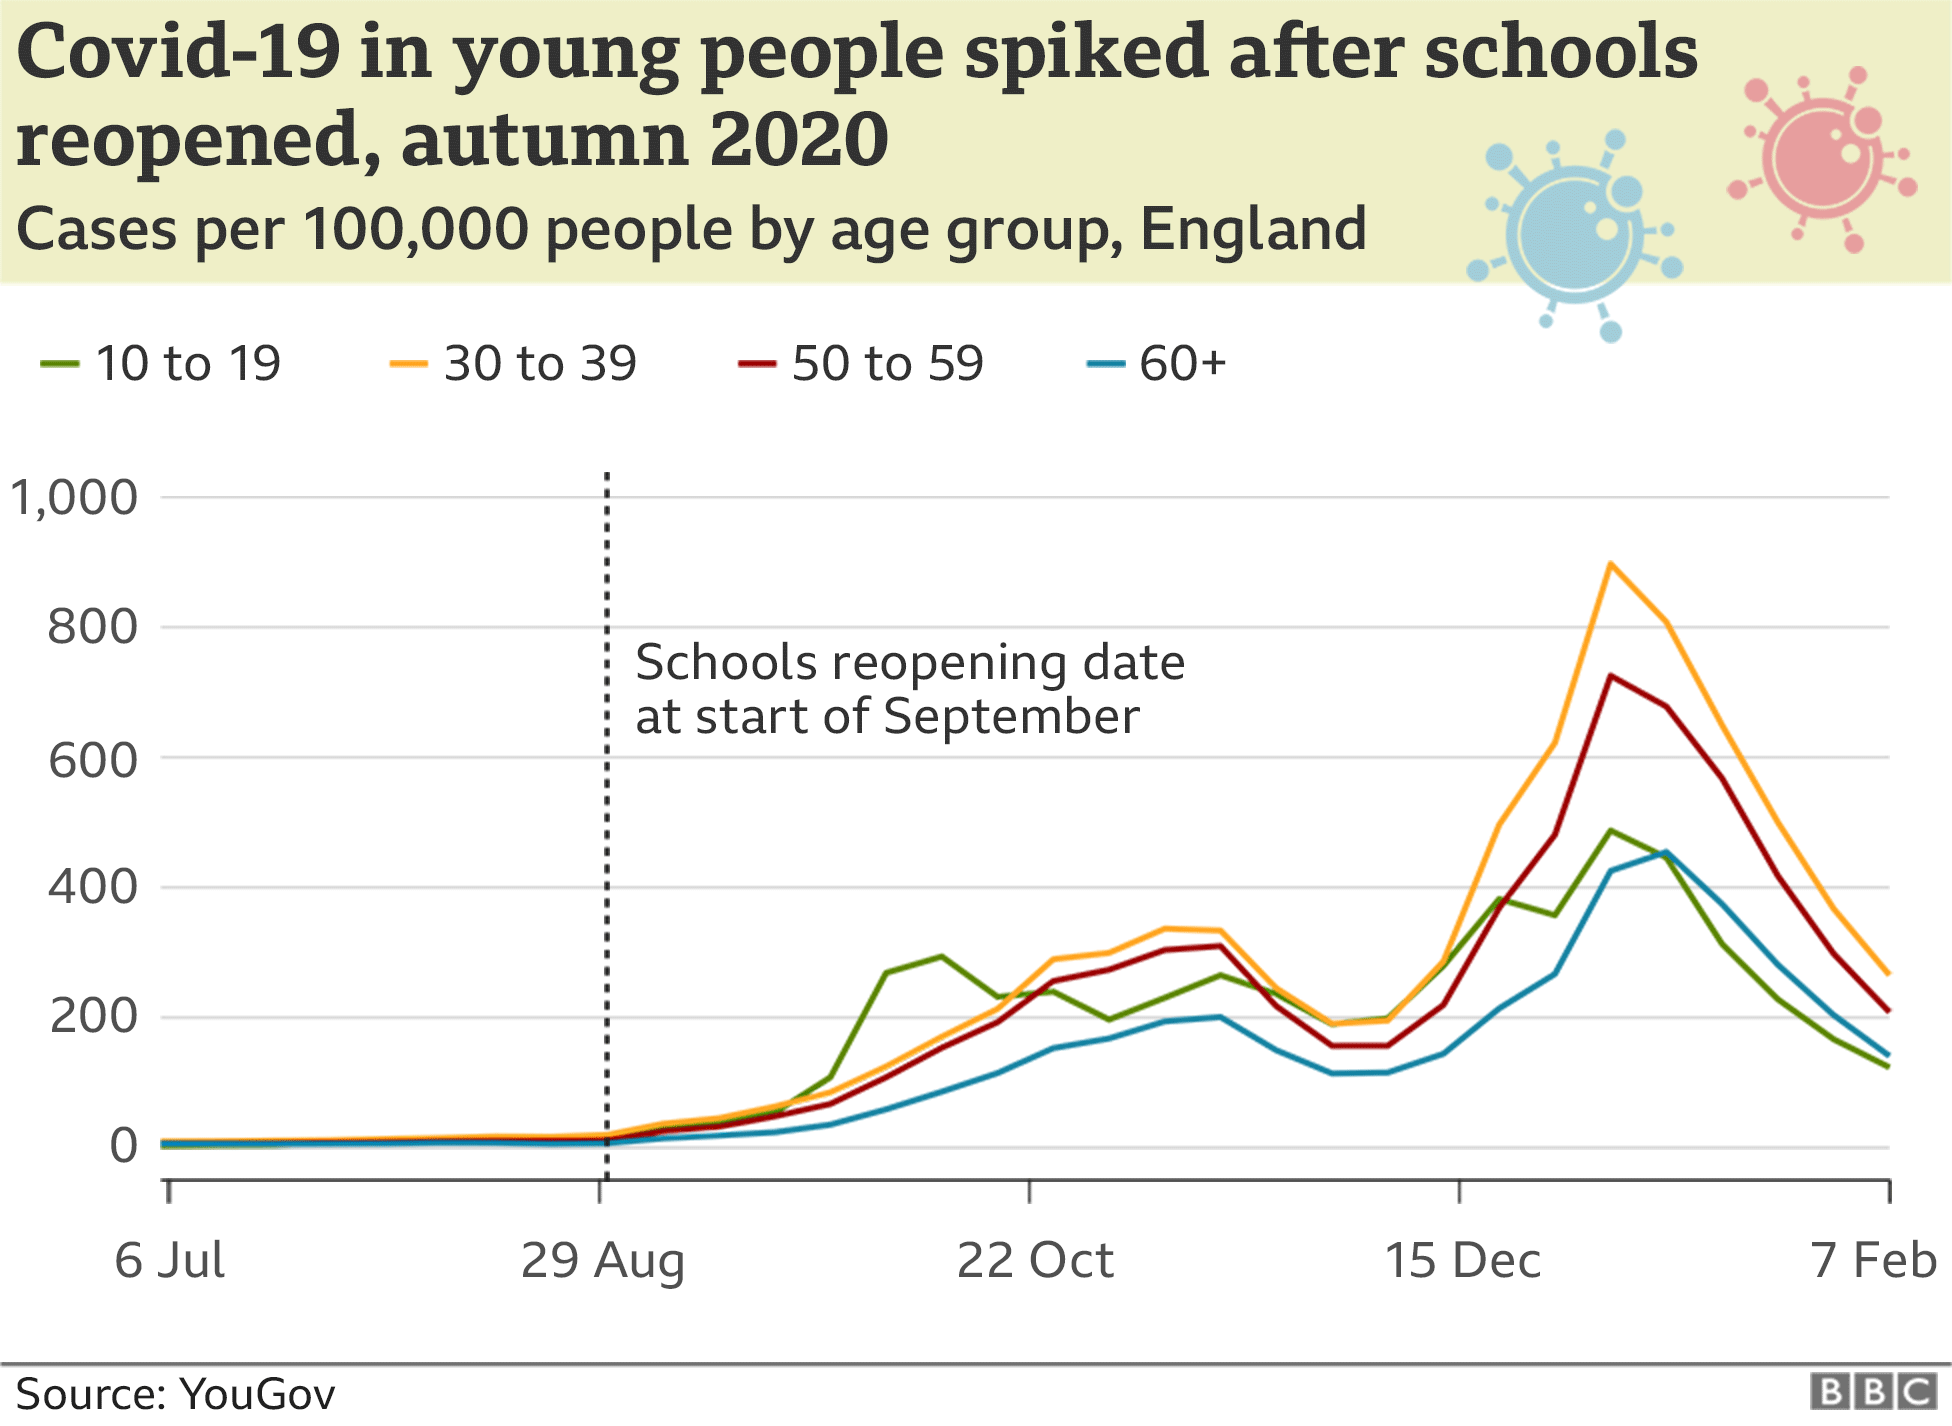 Graph showing how Covid-19 cases in young people spiked after schools reopened in autumn 2020